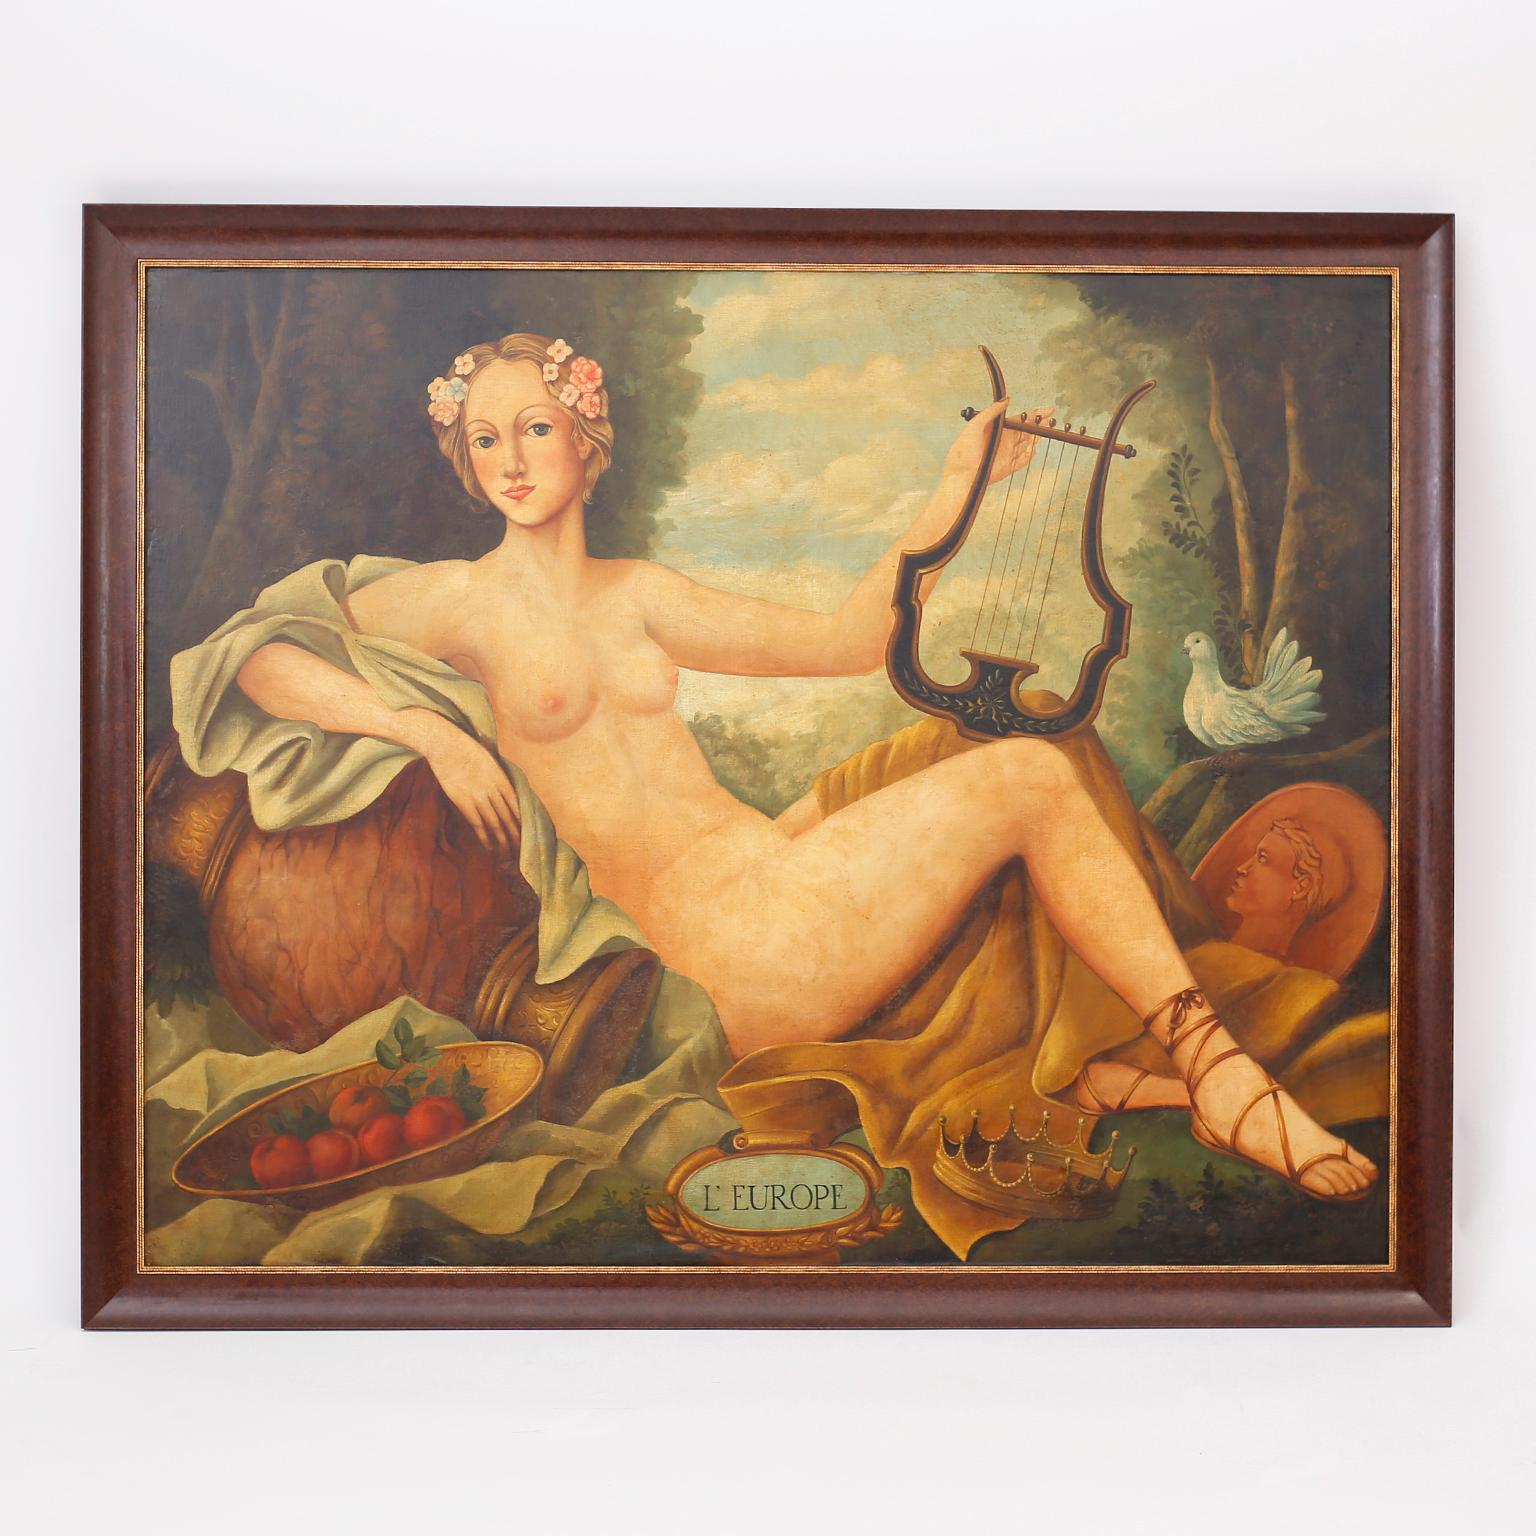 Oil paintings on board of reclining nude women, one in a classical setting with a lyre, titled L'EUROPE and the other of a woman under a red umbrella with pomegranates in a woodland setting, titled L'ASIE and signed Skilling in the lower right. Both